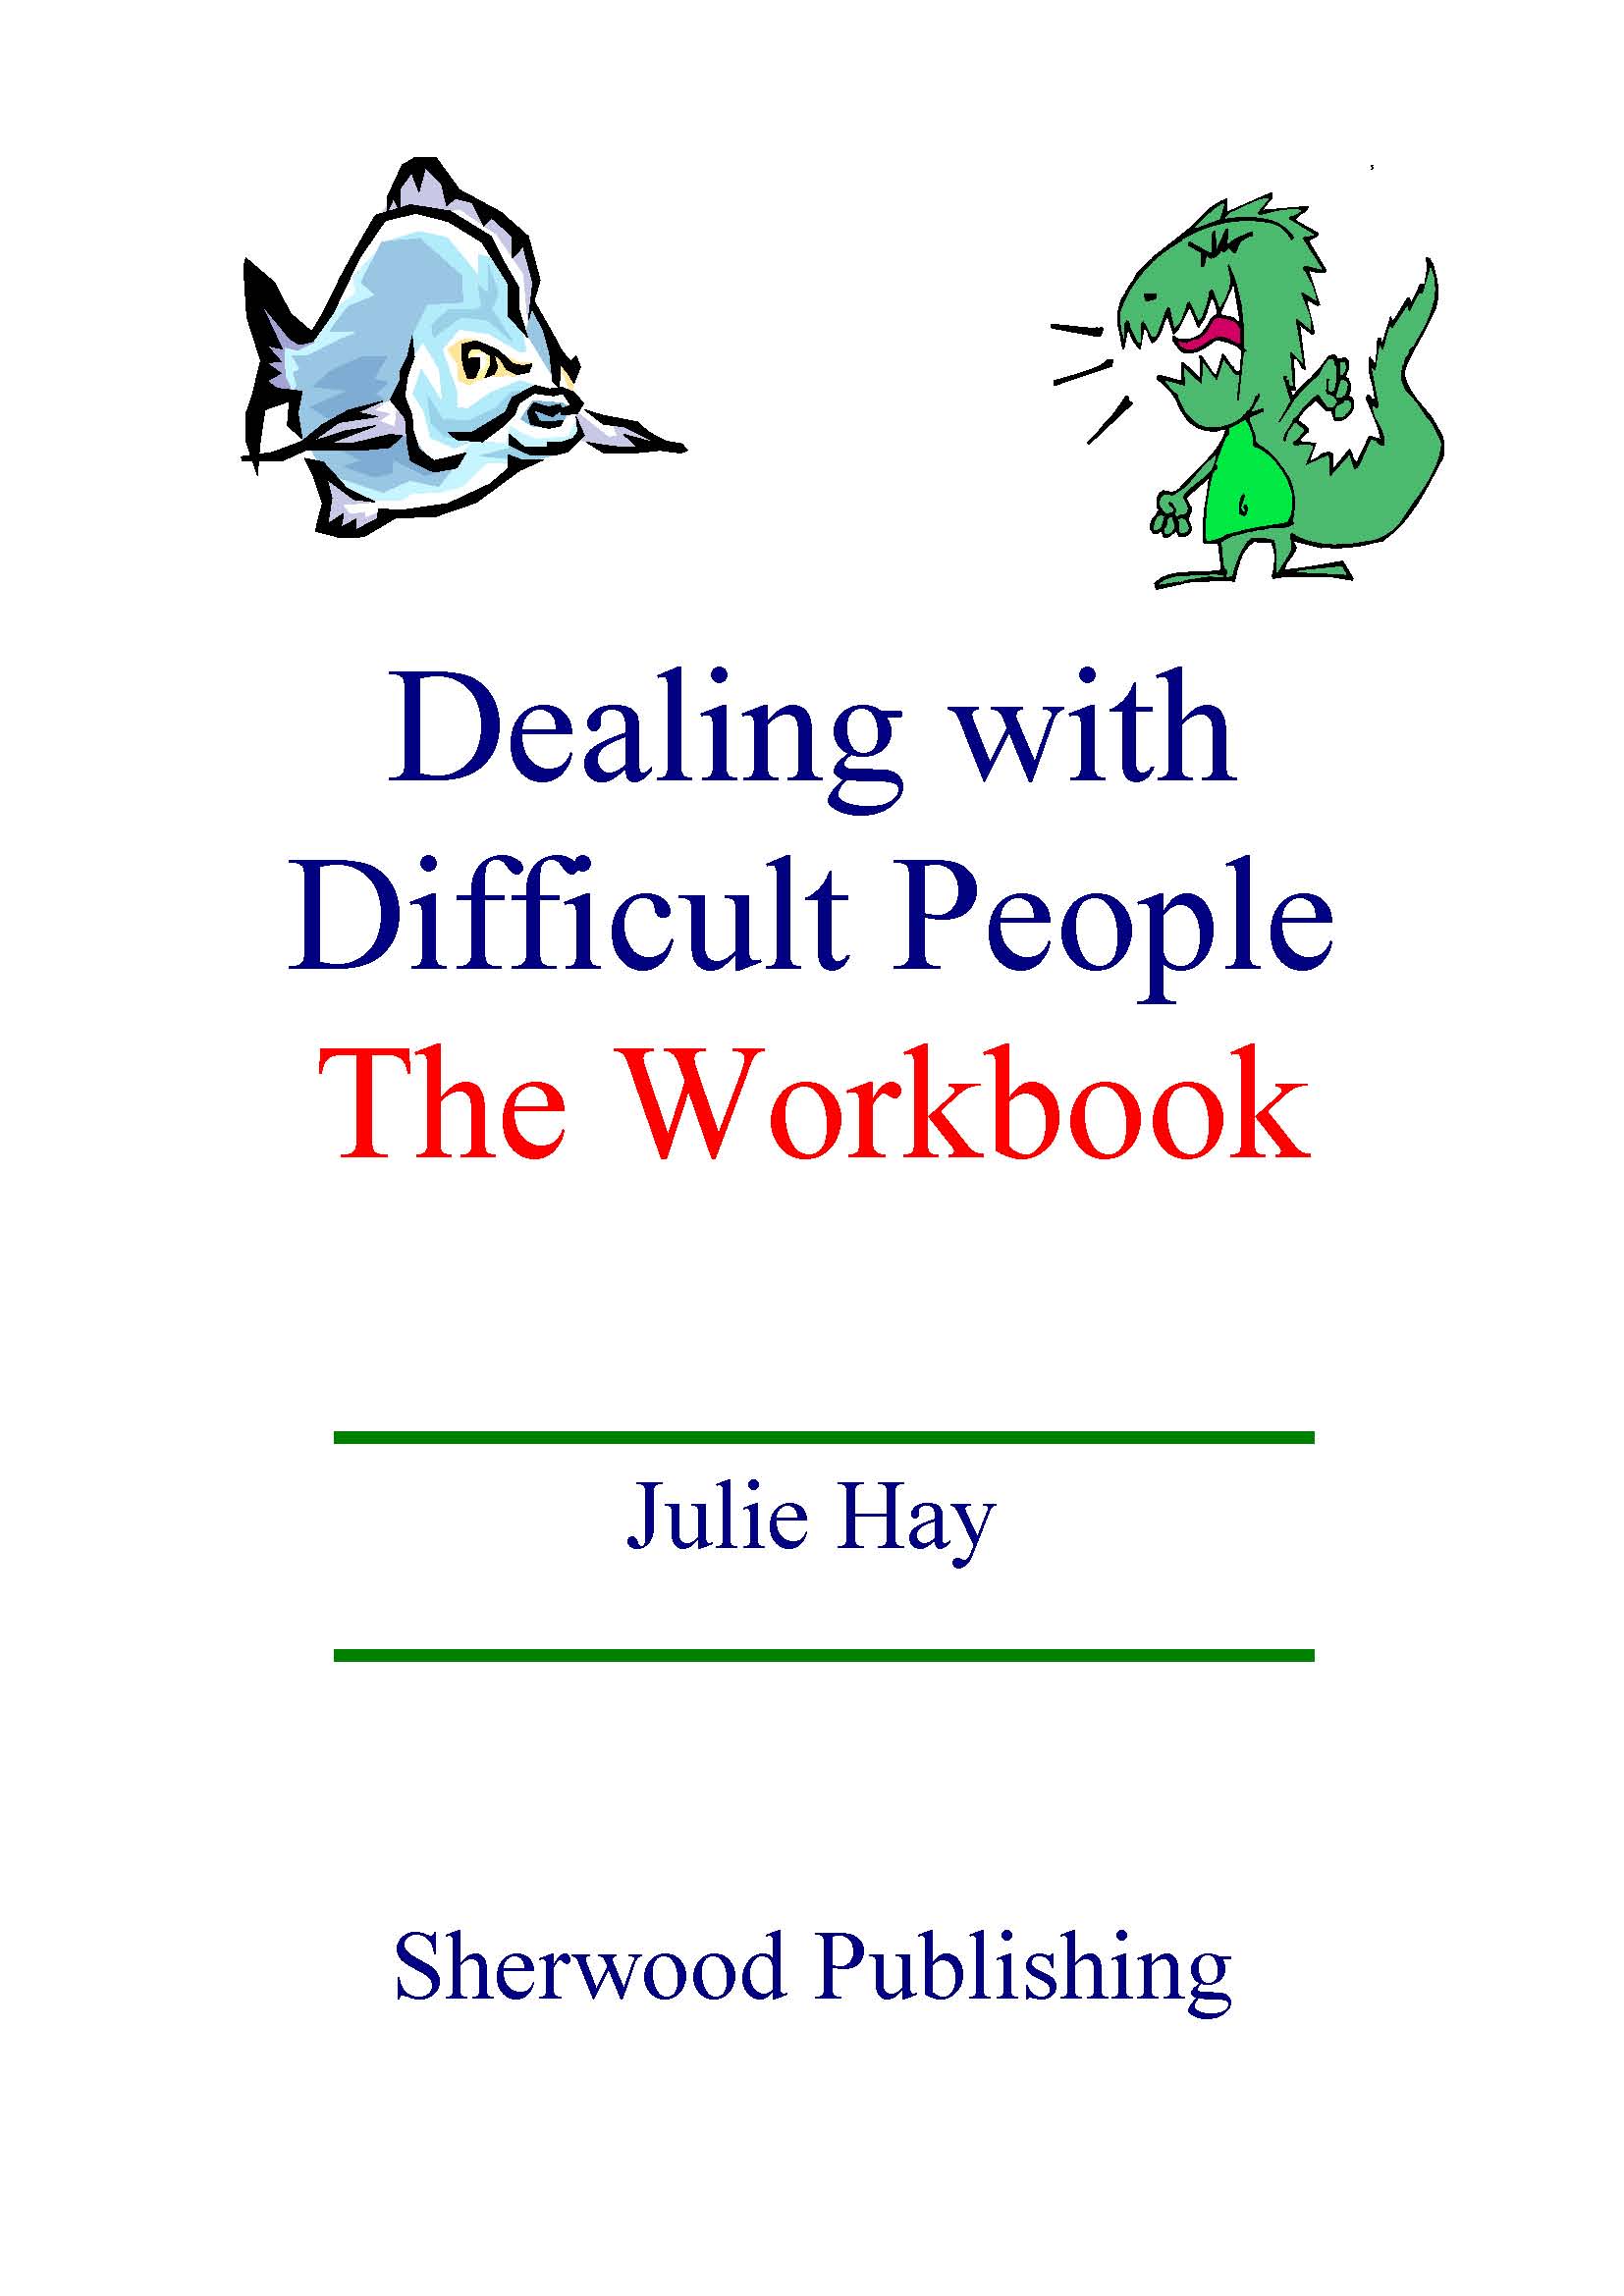 Dealing With Difficult People - Workbook PDF Download Only